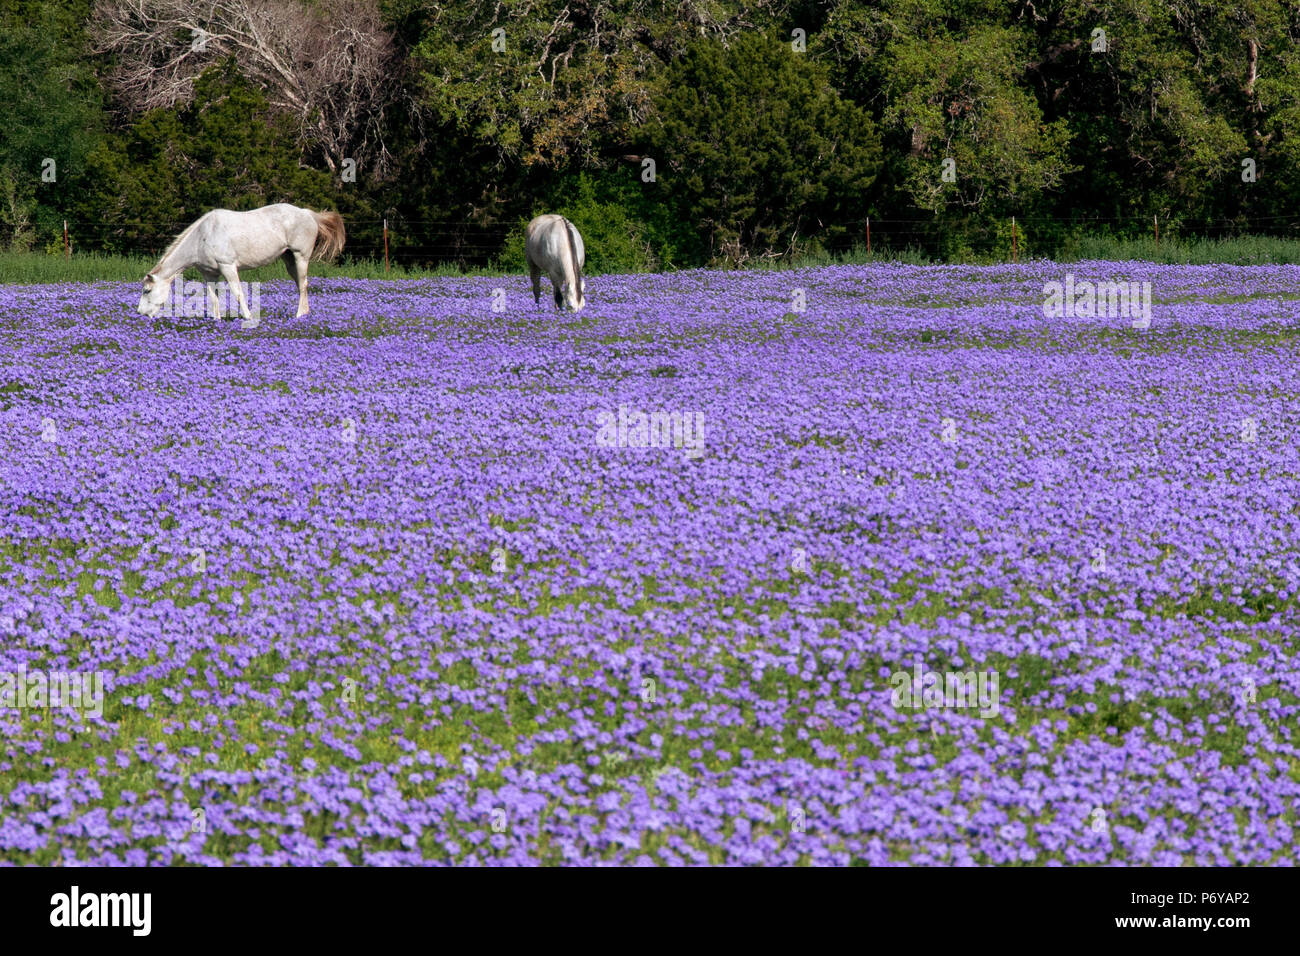 Twin White Horses grazing in a field filled with lavender and purple flowers  during springtime in the Texas Hill Country. Stock Photo